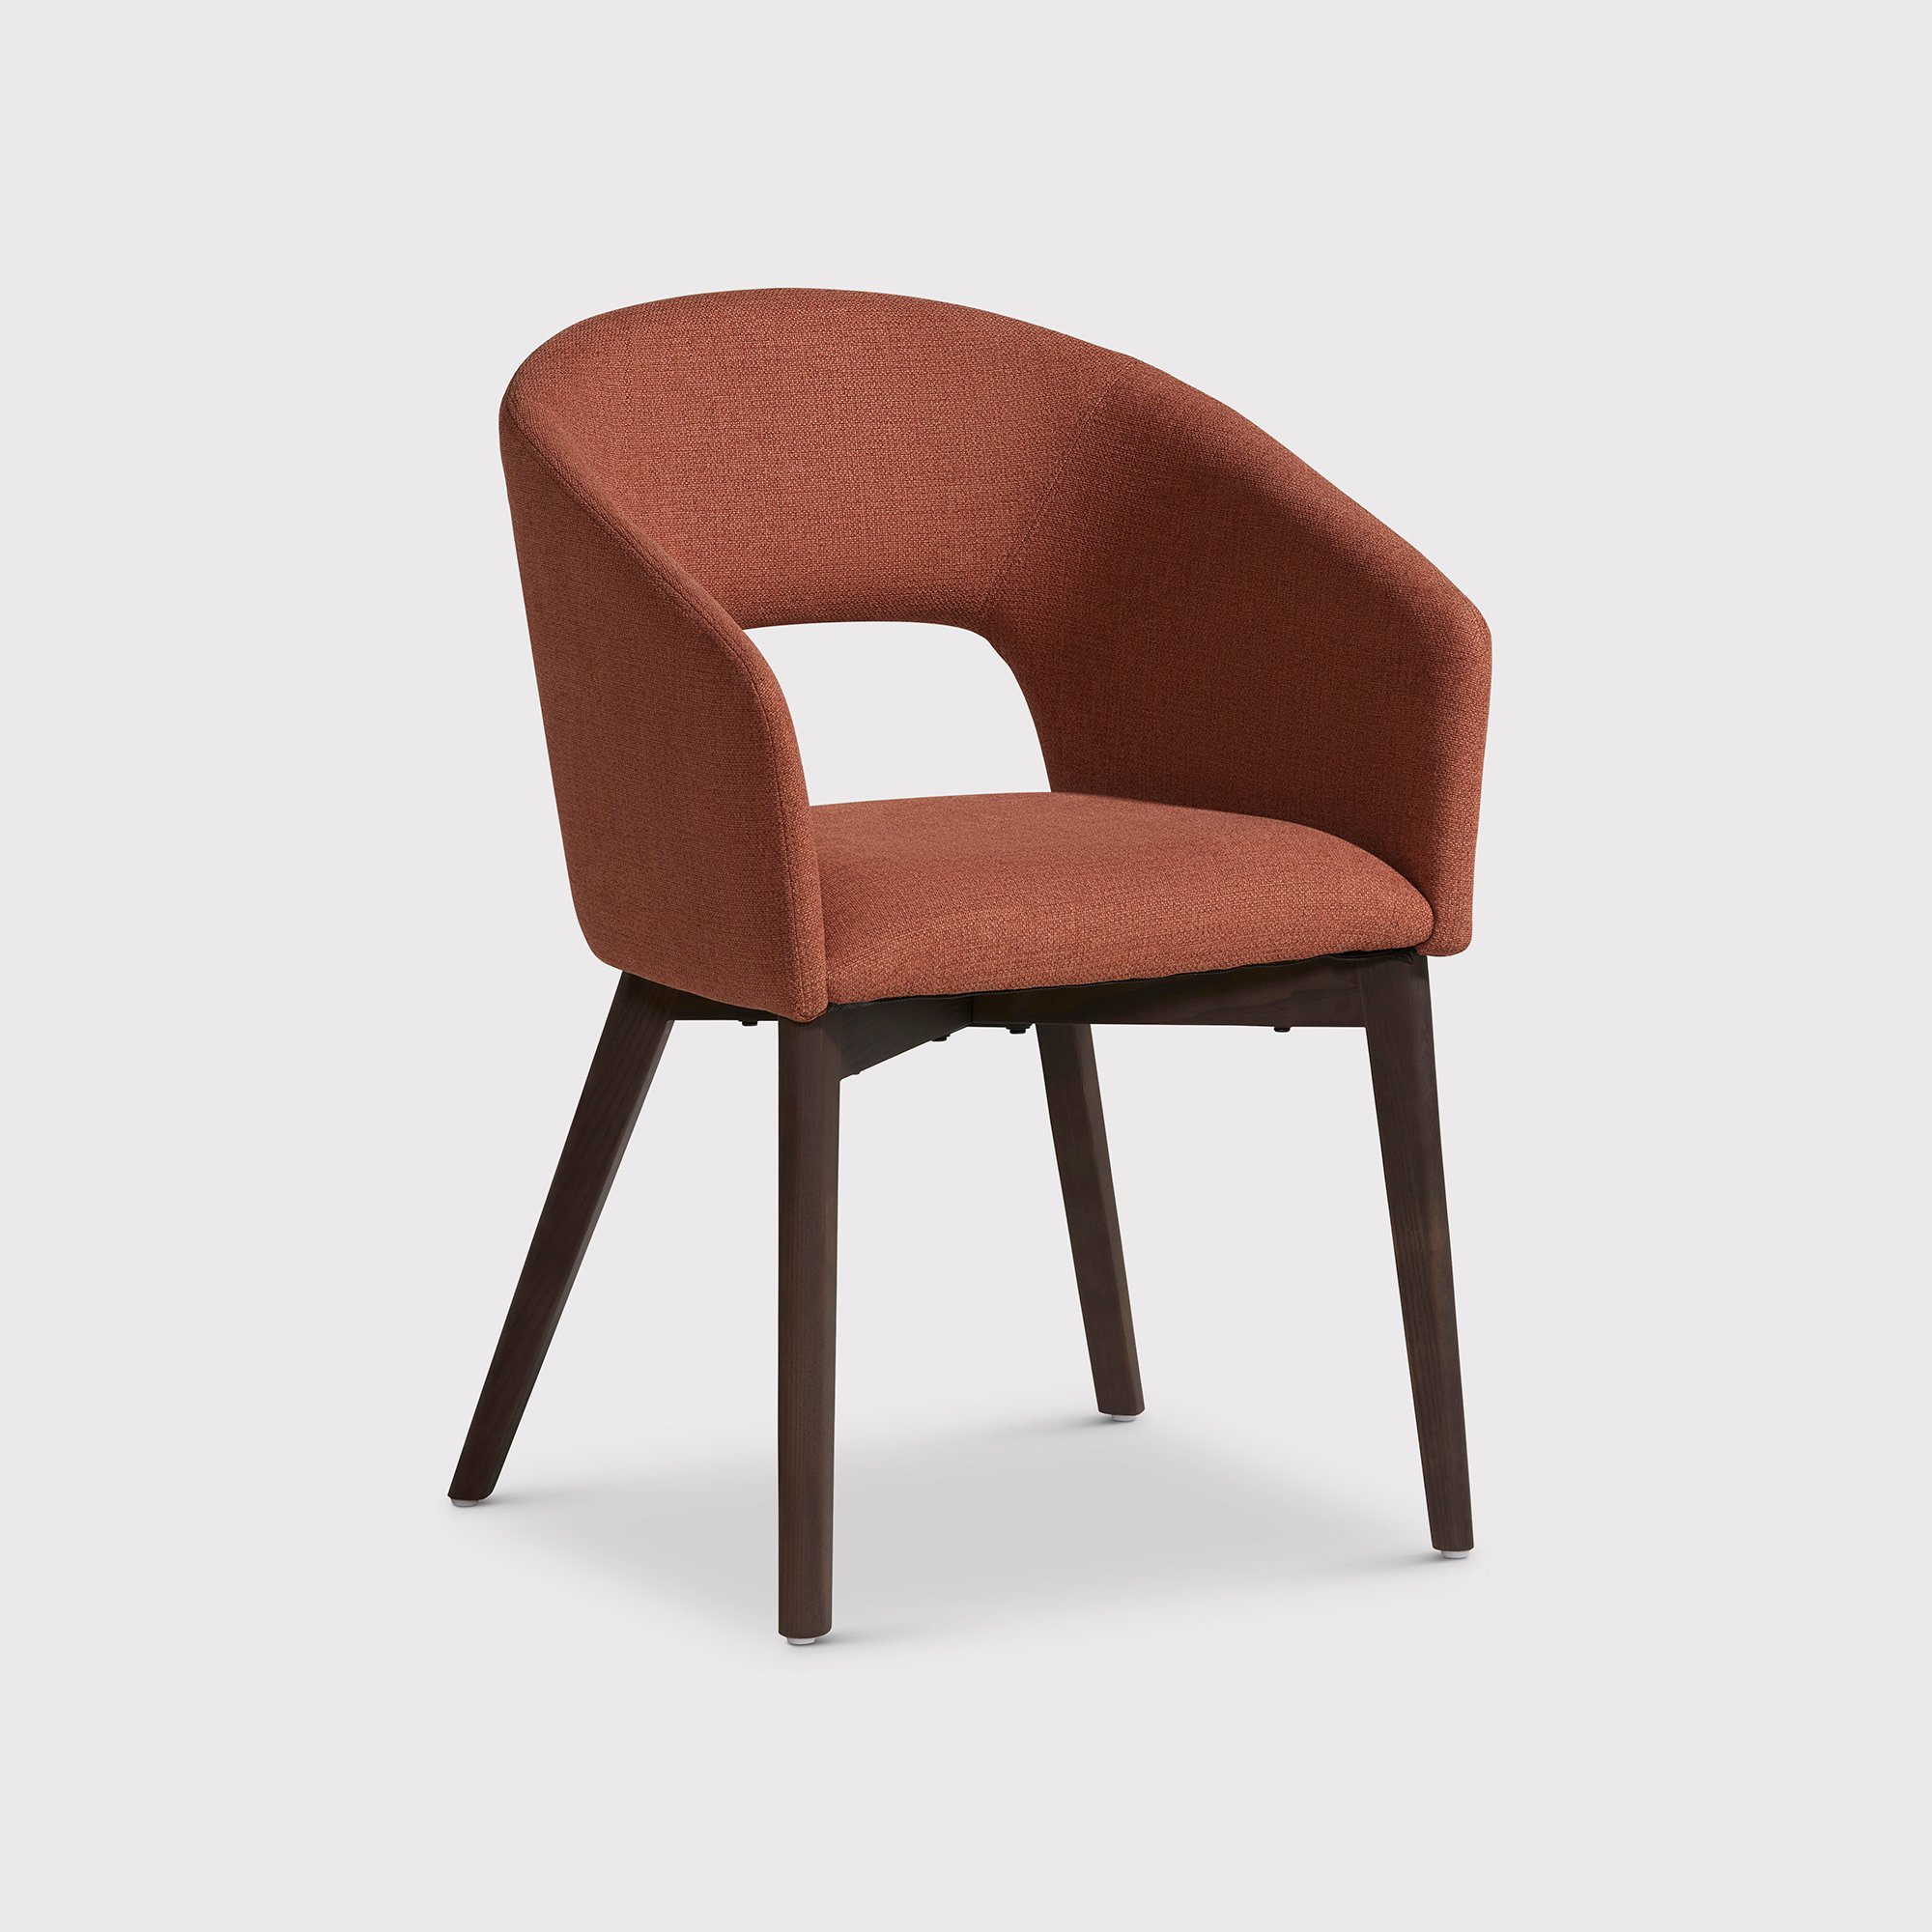 Tish Dining Chair, Brown | Barker & Stonehouse